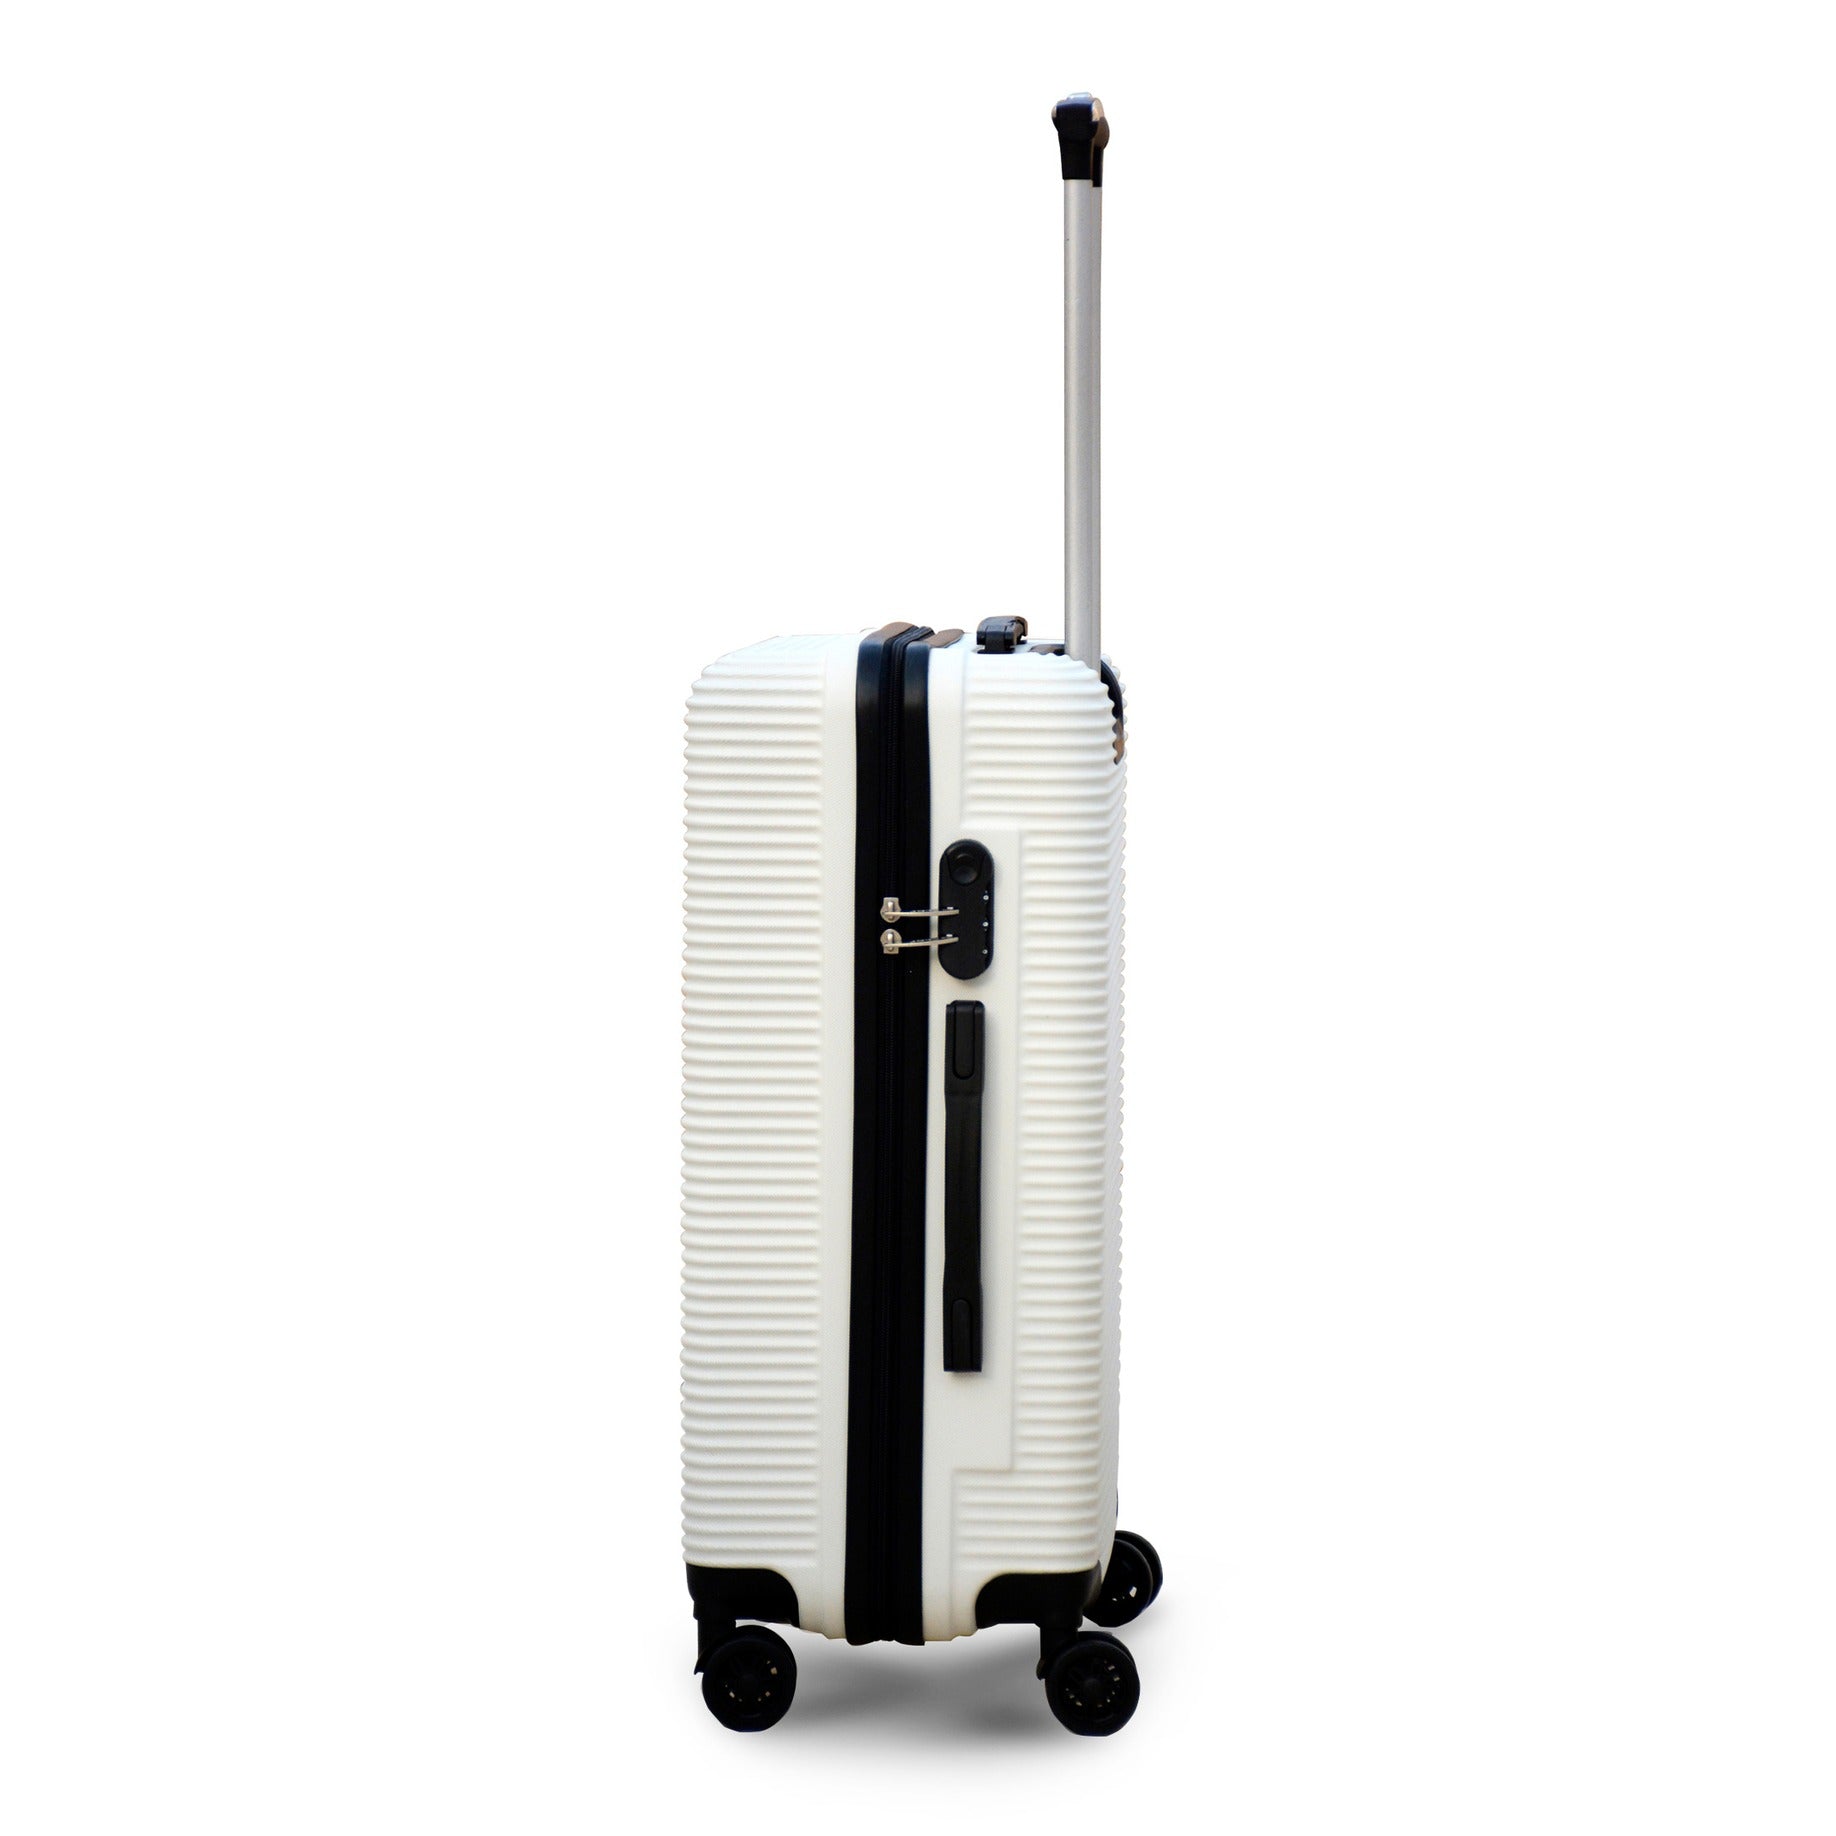 28" White Colour JIAN ABS Line Luggage Lightweight Hard Case Spinner Wheel Trolley Bag